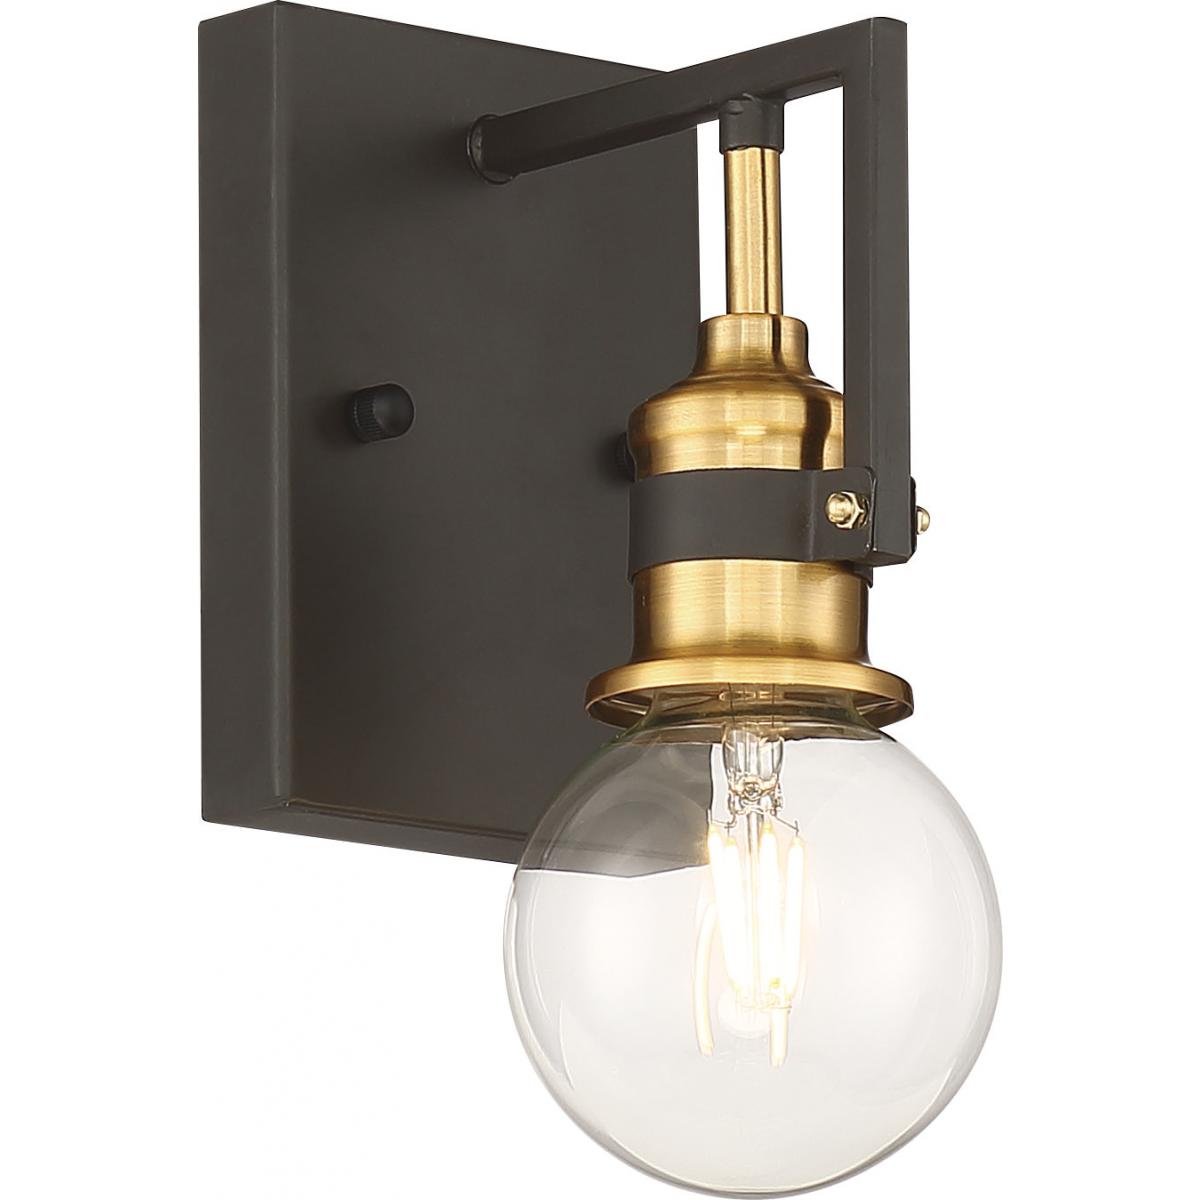 Nuvo Lighting 60-6971 Intention 1 Light Vanity Sconce in Warm Brass and Black